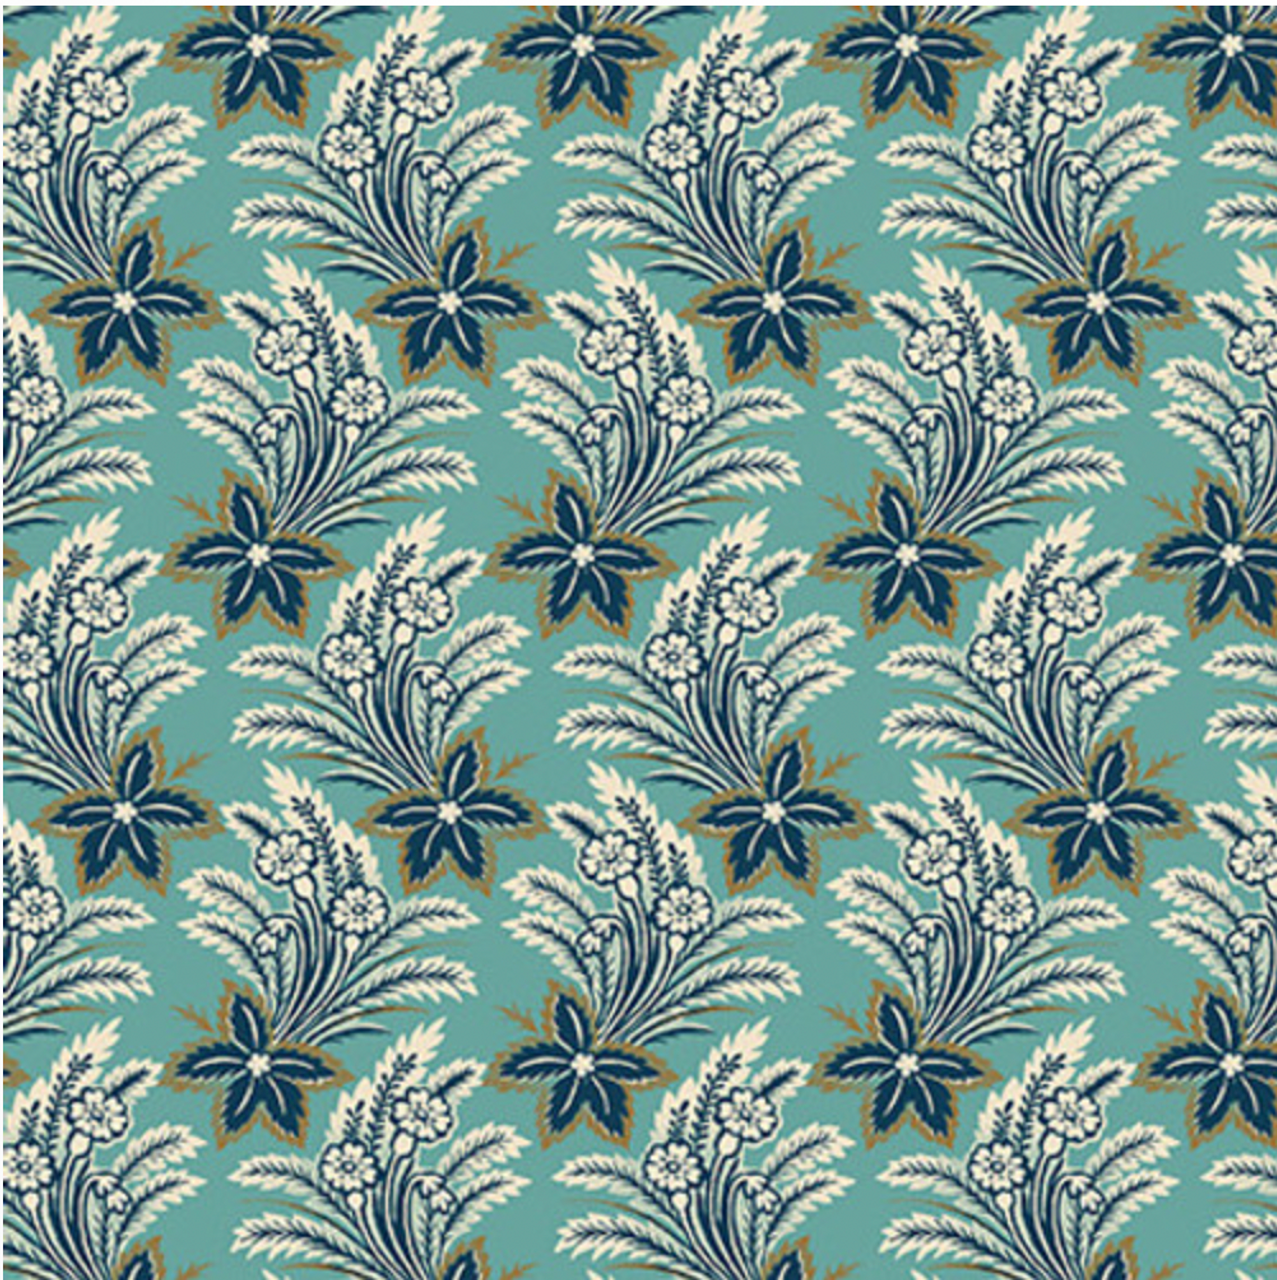 Henry Glass Lille Swaying Flowers Lt Teal Fabric By The Yard